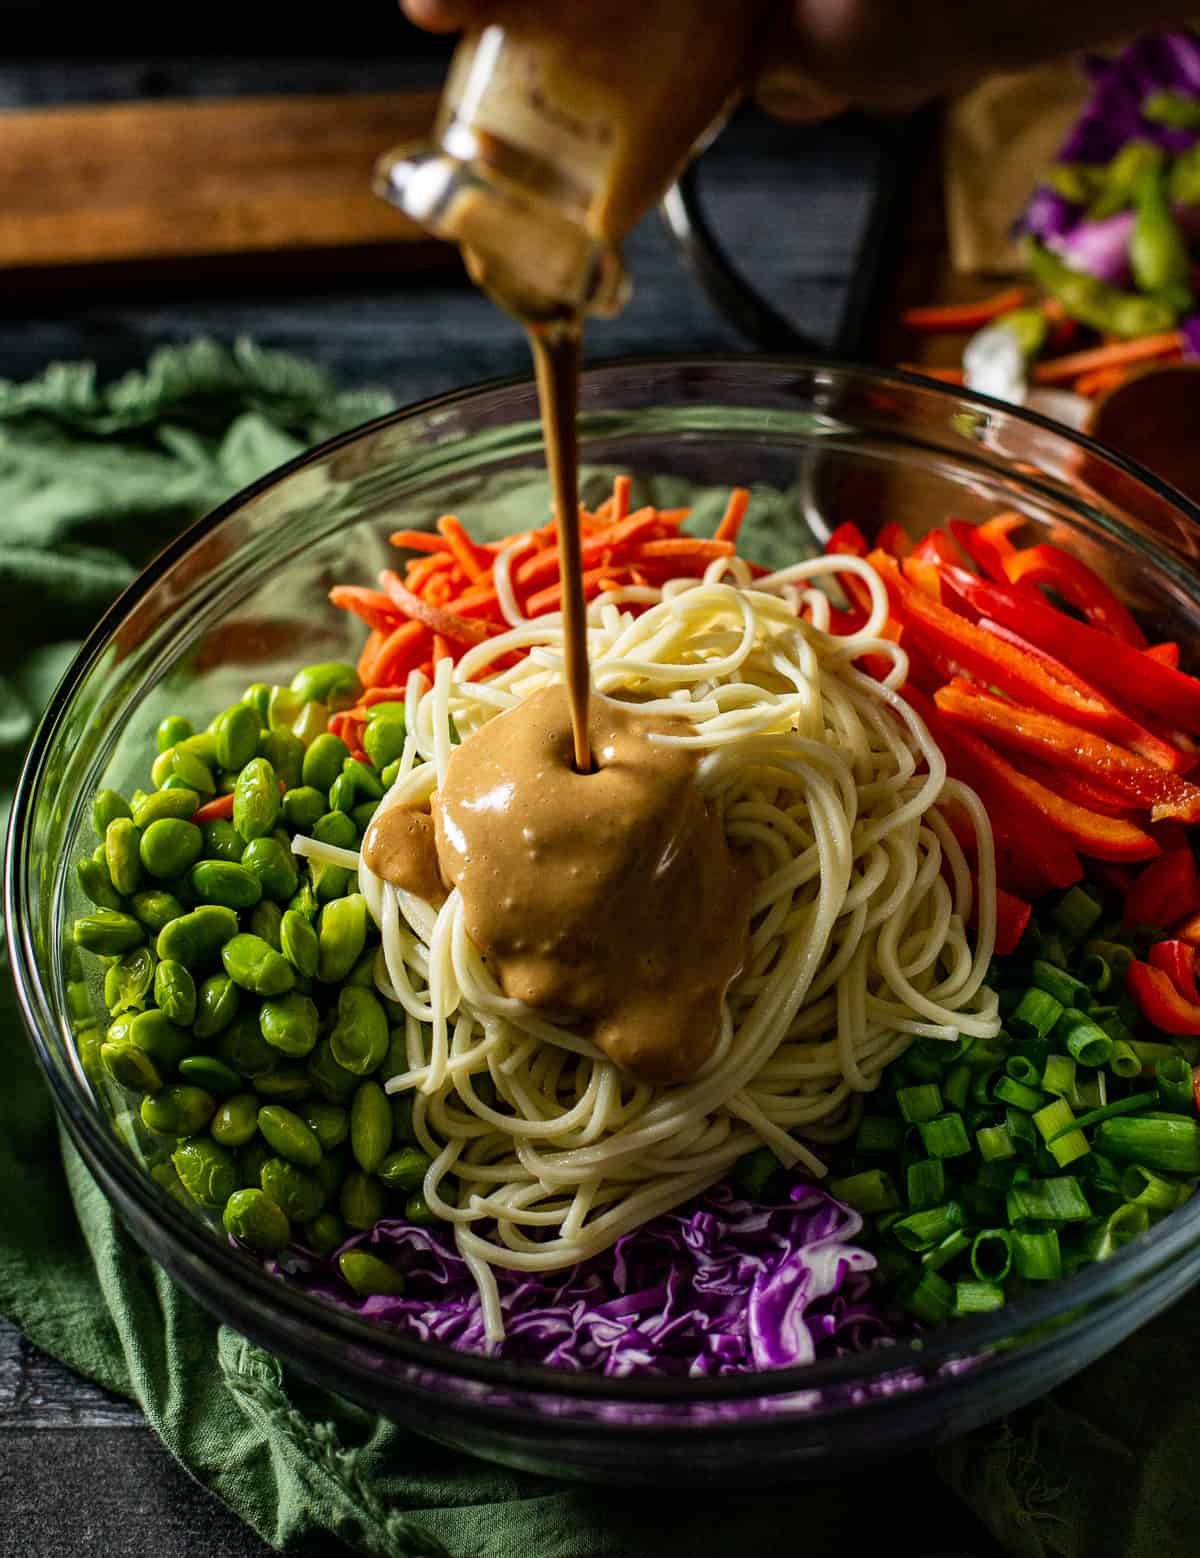 peanut sauce being poured over veggies and noodles in bowl